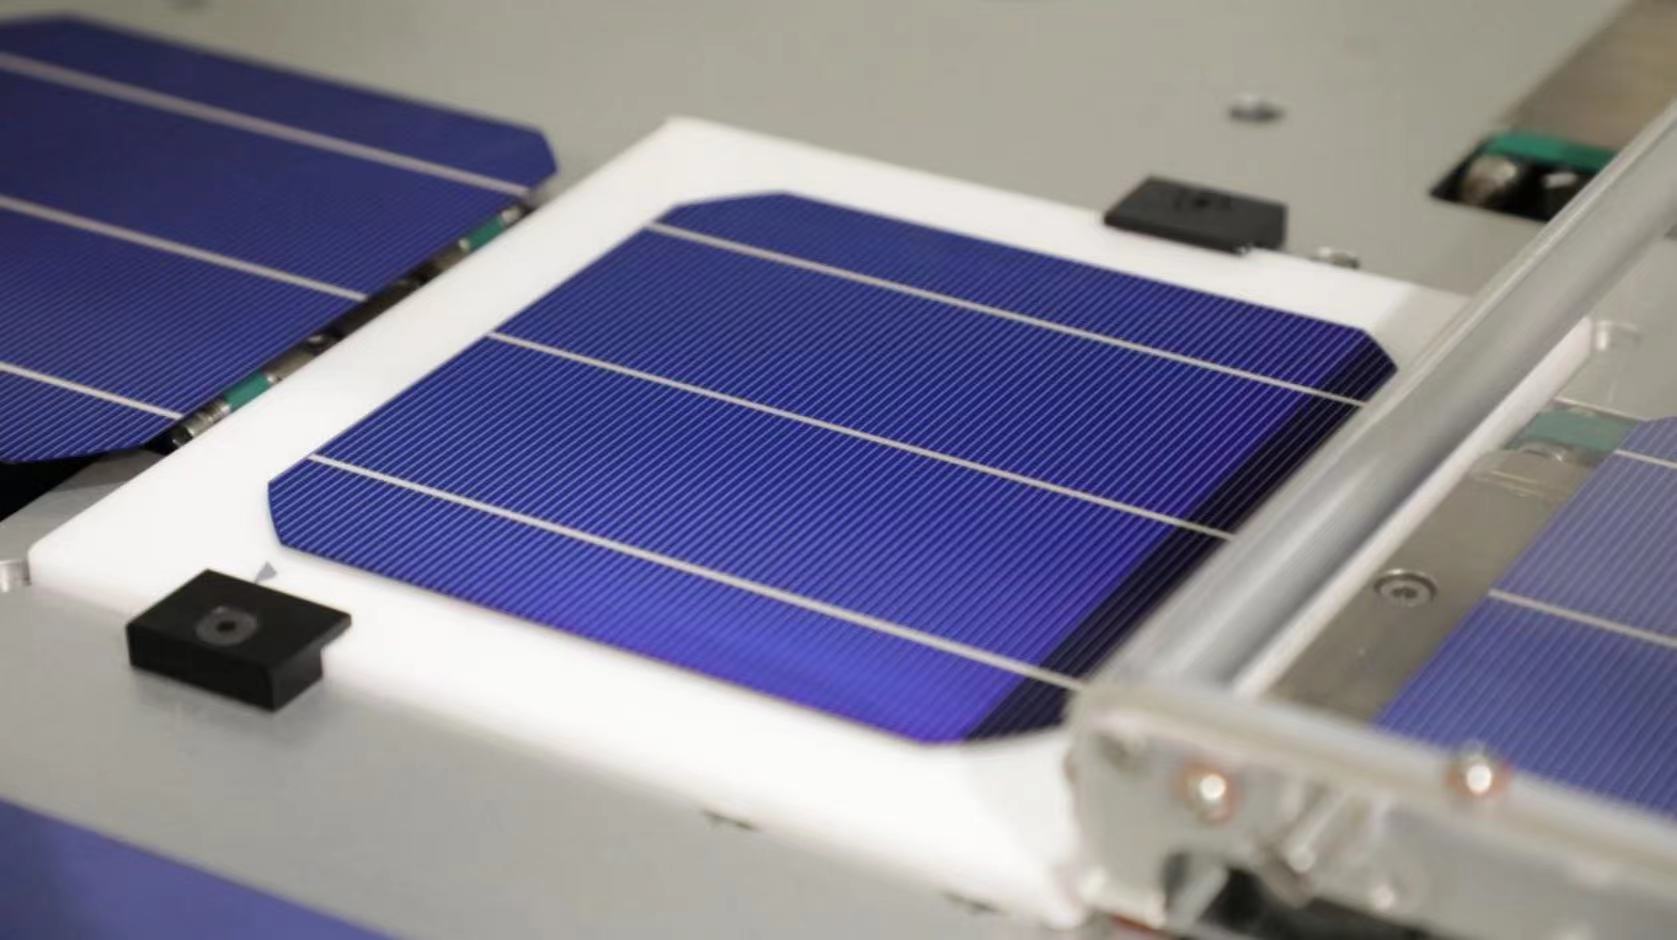 What are the opportunities and challenges faced by metallized pastes for TOPCon Solar Cells?